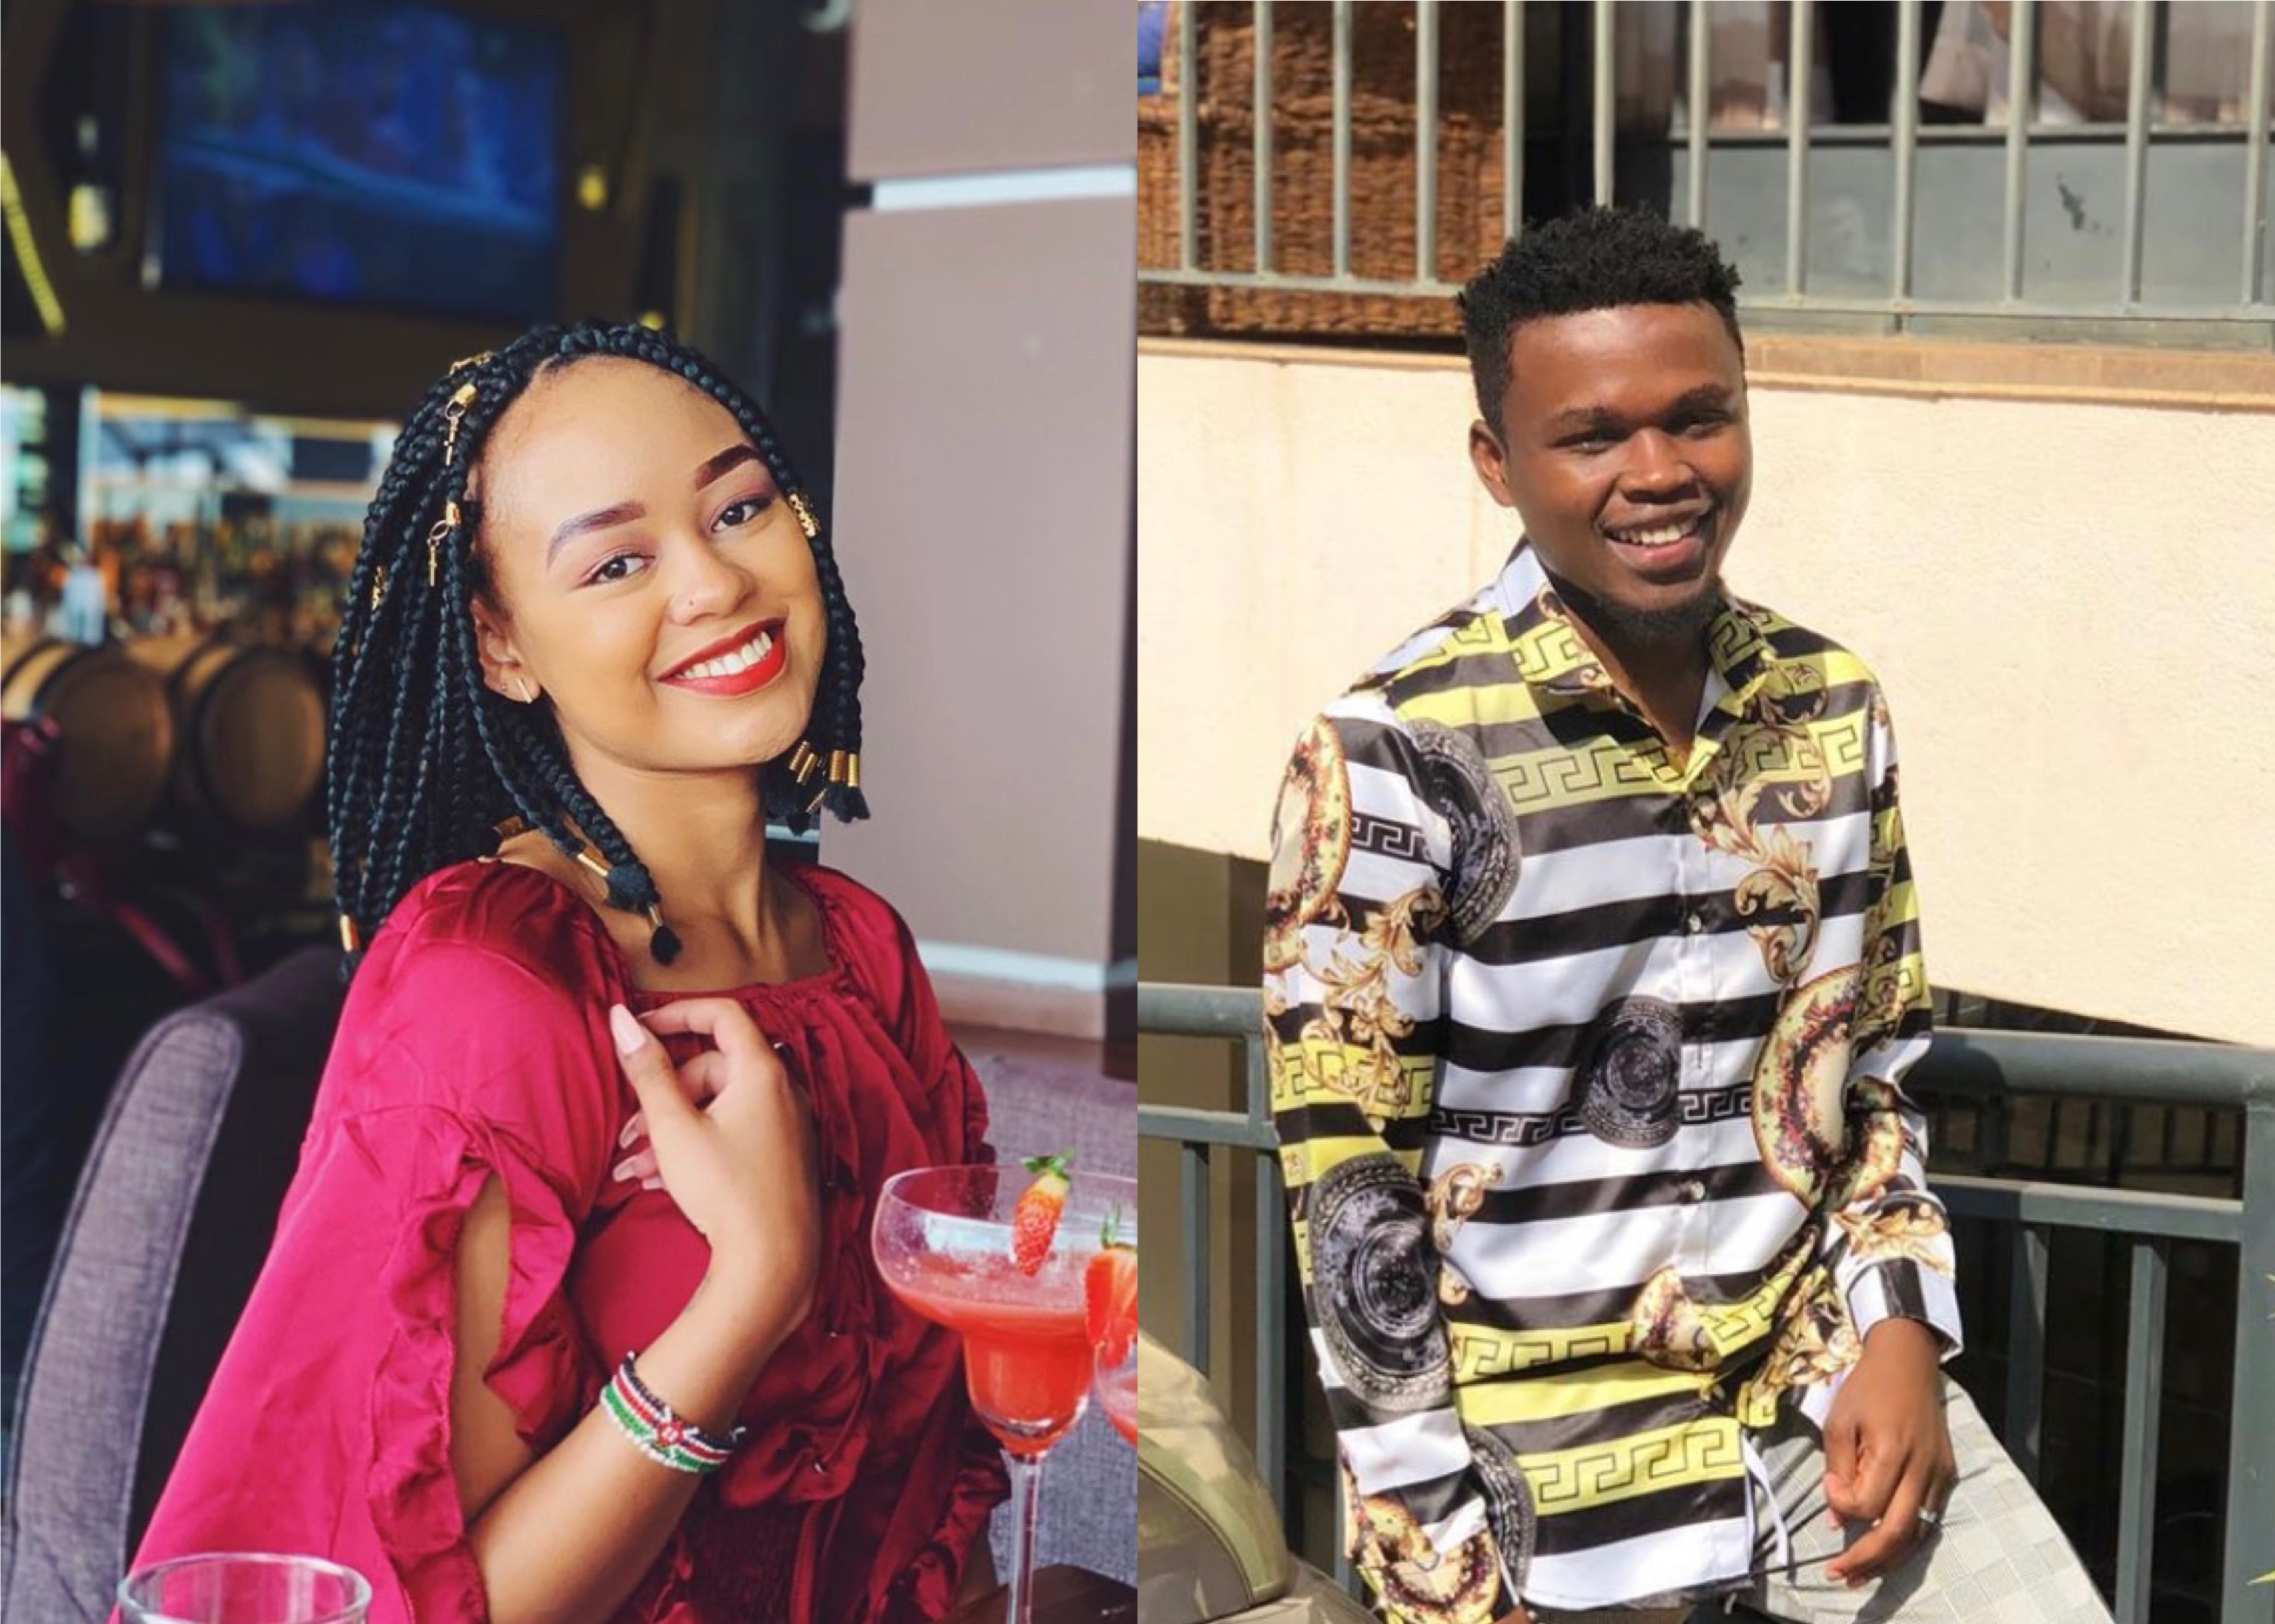 Trouble in paradise! Chipukeezy and girlfriend unfollow each other on social media, are they calling off their relationship?